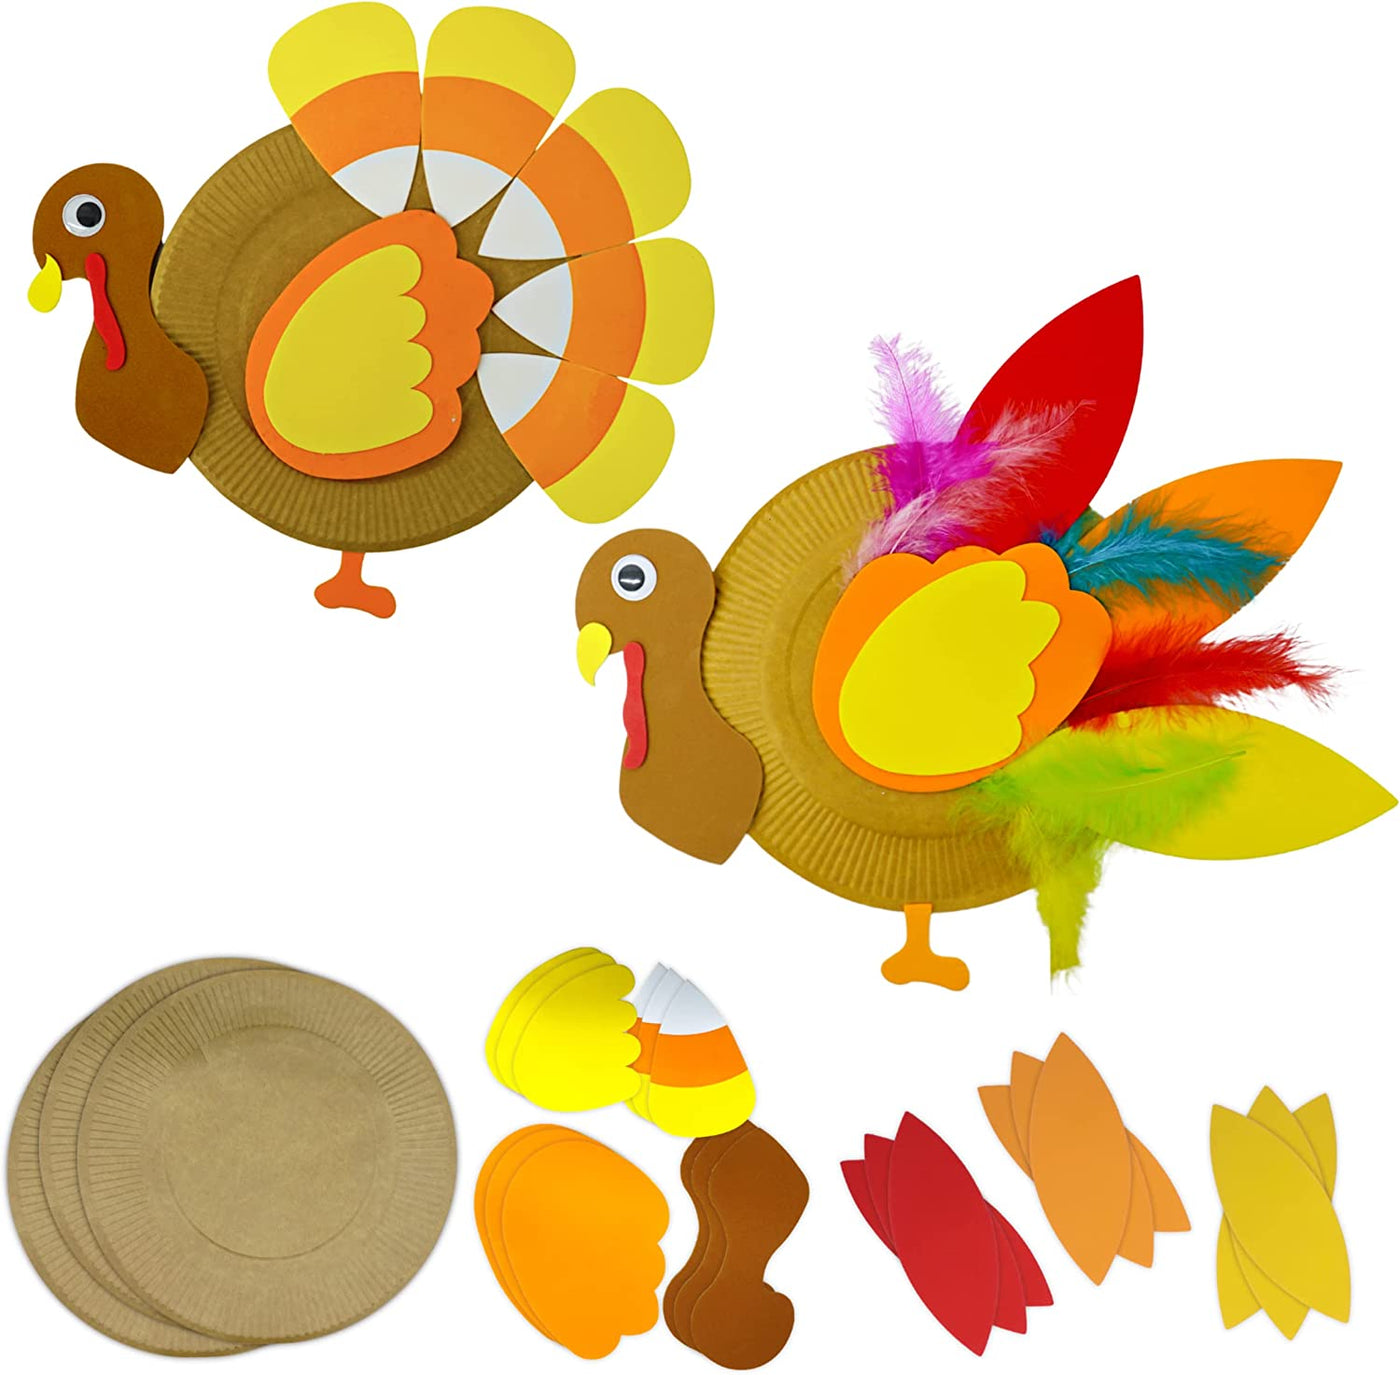 4E's Novelty Turkey Plate Craft for Kids (12 Pack) 2 Styles, Self Adhesive, Fall Thanksgiving Crafts for Kids & Toddlers Ages 4-8, 3-12 Fun Thanksgiving Activity & Dinner Game